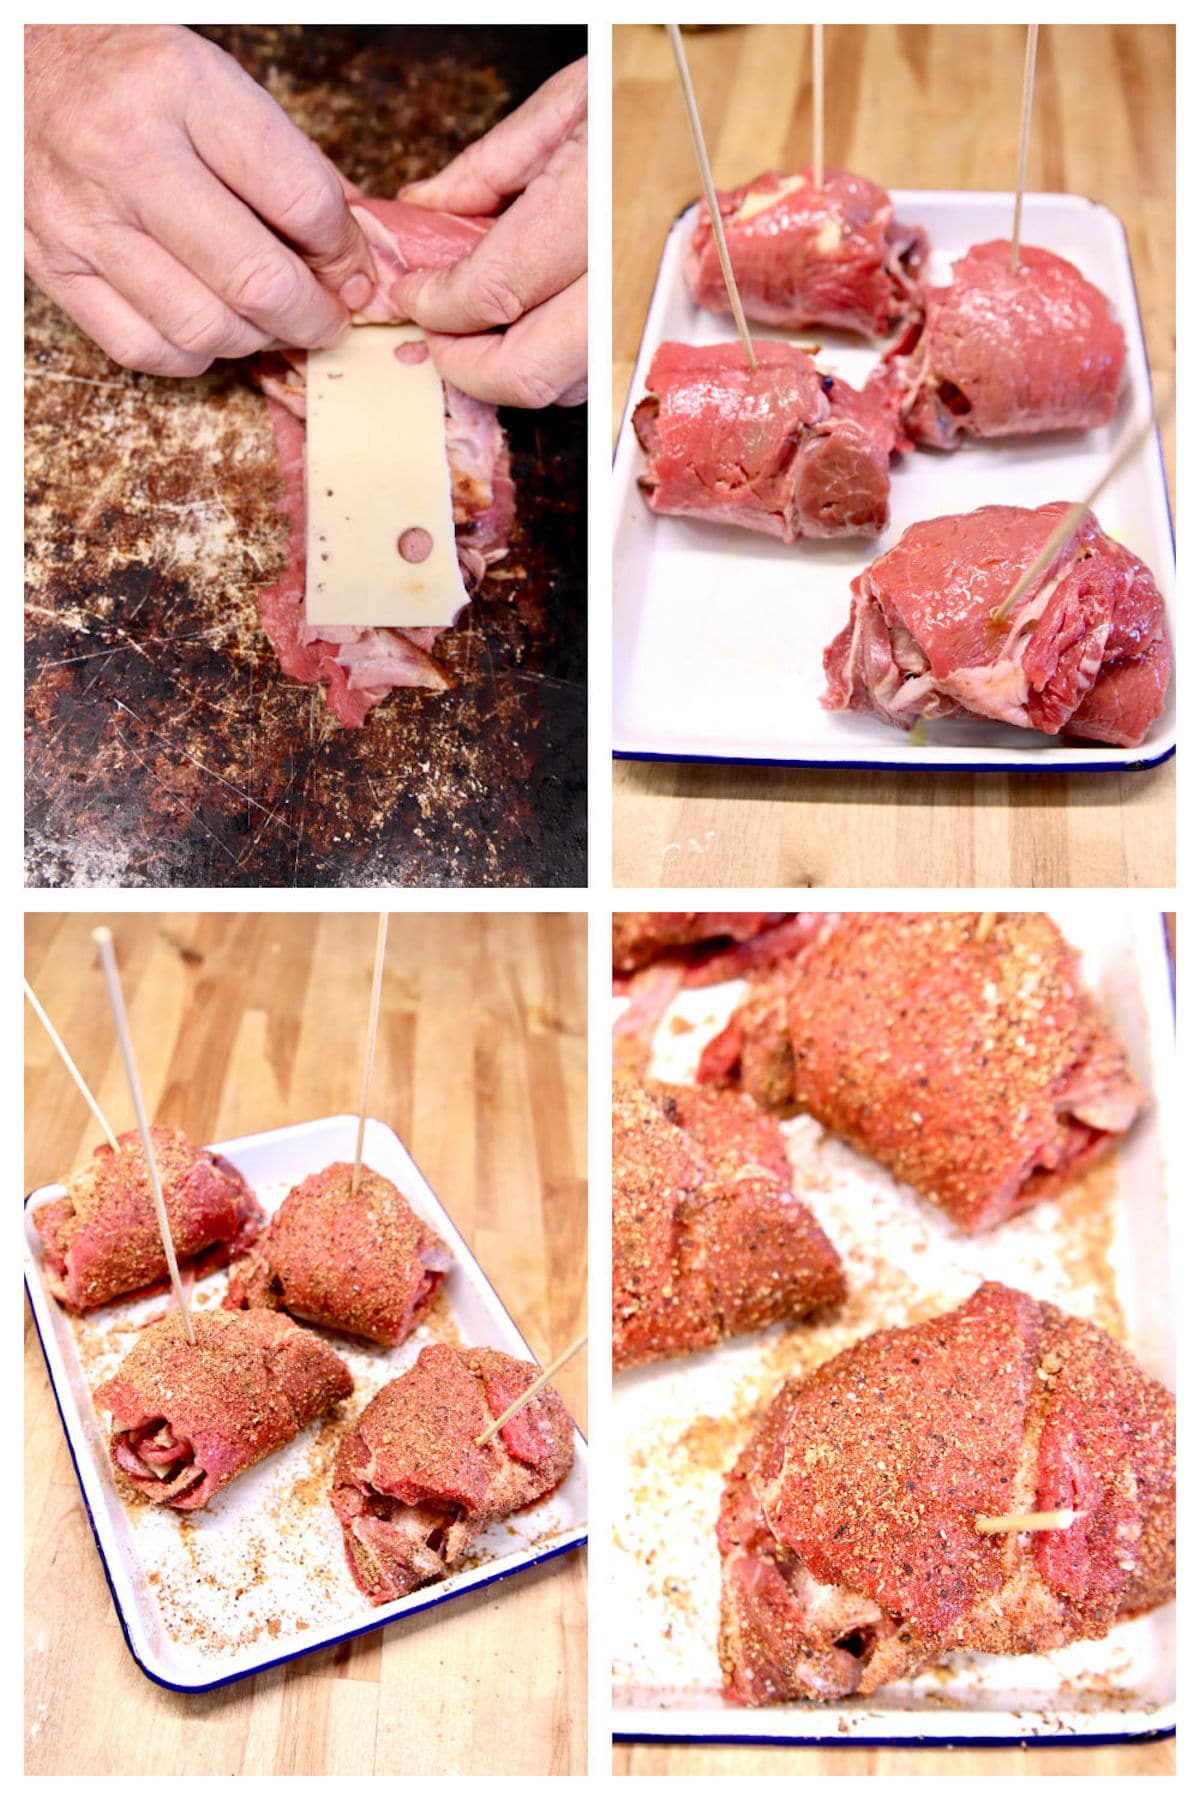 Collage: rolling up steak with ham and cheese. Seasoning steak rolls, adding wooden skewers.